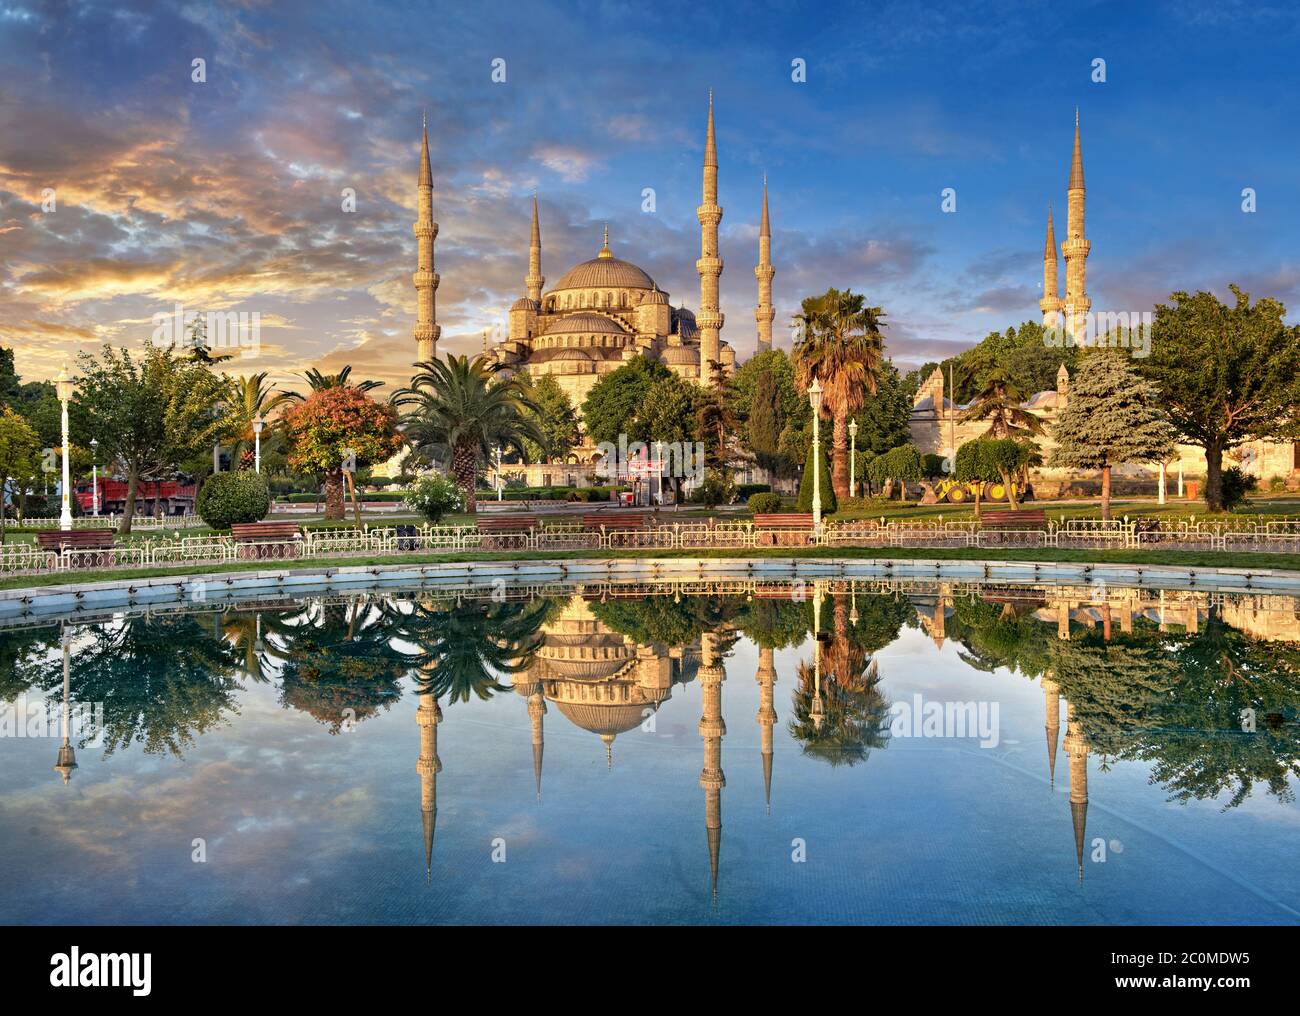 Sunset over the Sultan Ahmed Mosque (Sultanahmet Camii) or Blue Mosque, Istanbul, Turkey. Built from 1609 to 1616 during the rule of Ahmed I. Stock Photo